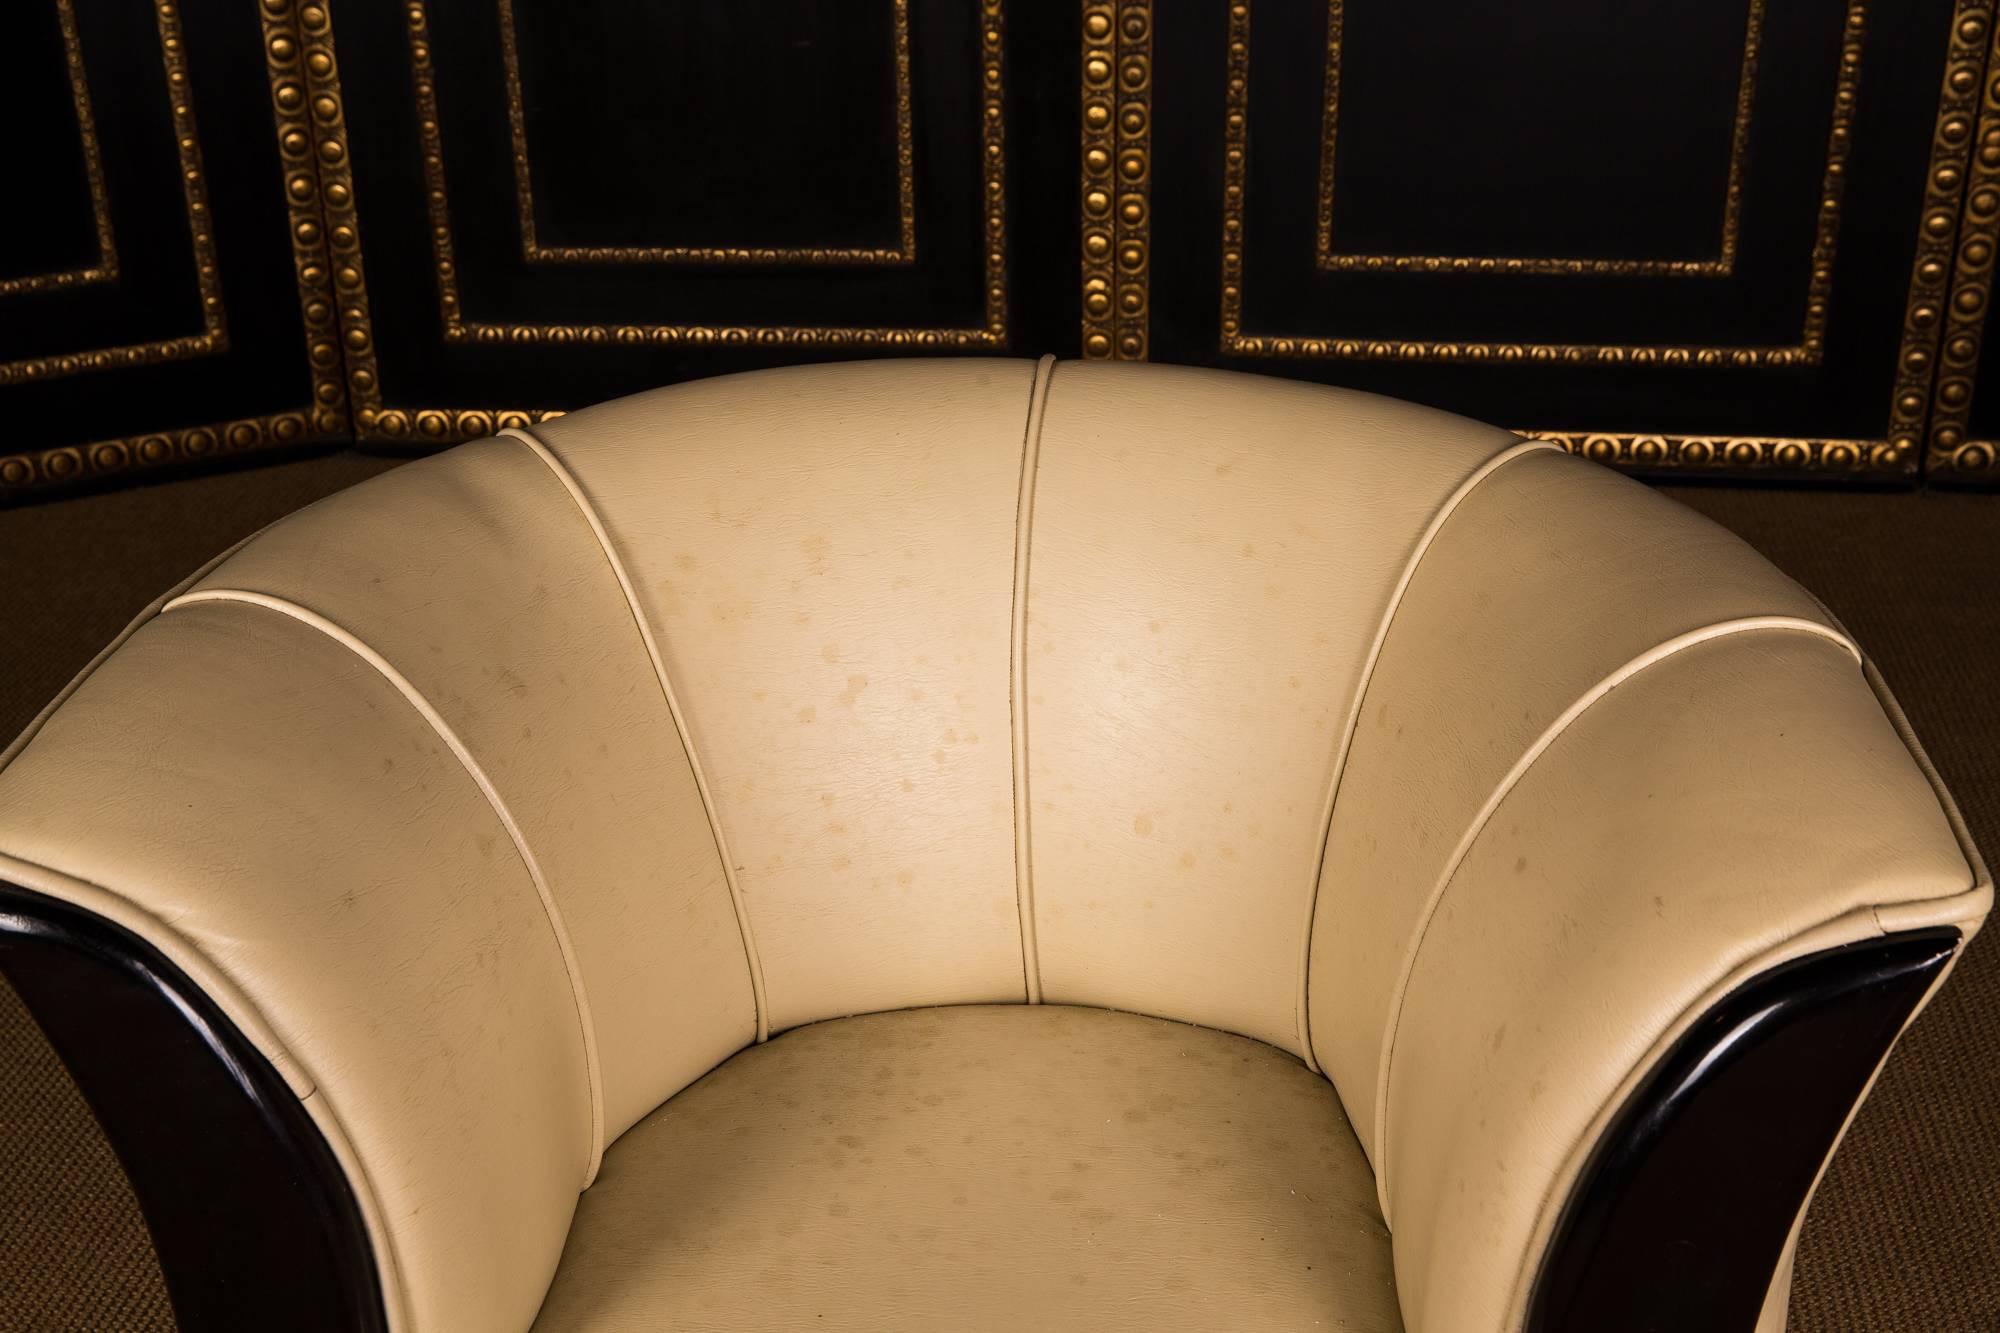 On round black base, high seating flanked by two blackened pointed wooden frames. Backrest leaning backwards. The leatherette is dirty and must be cleaned or changed.